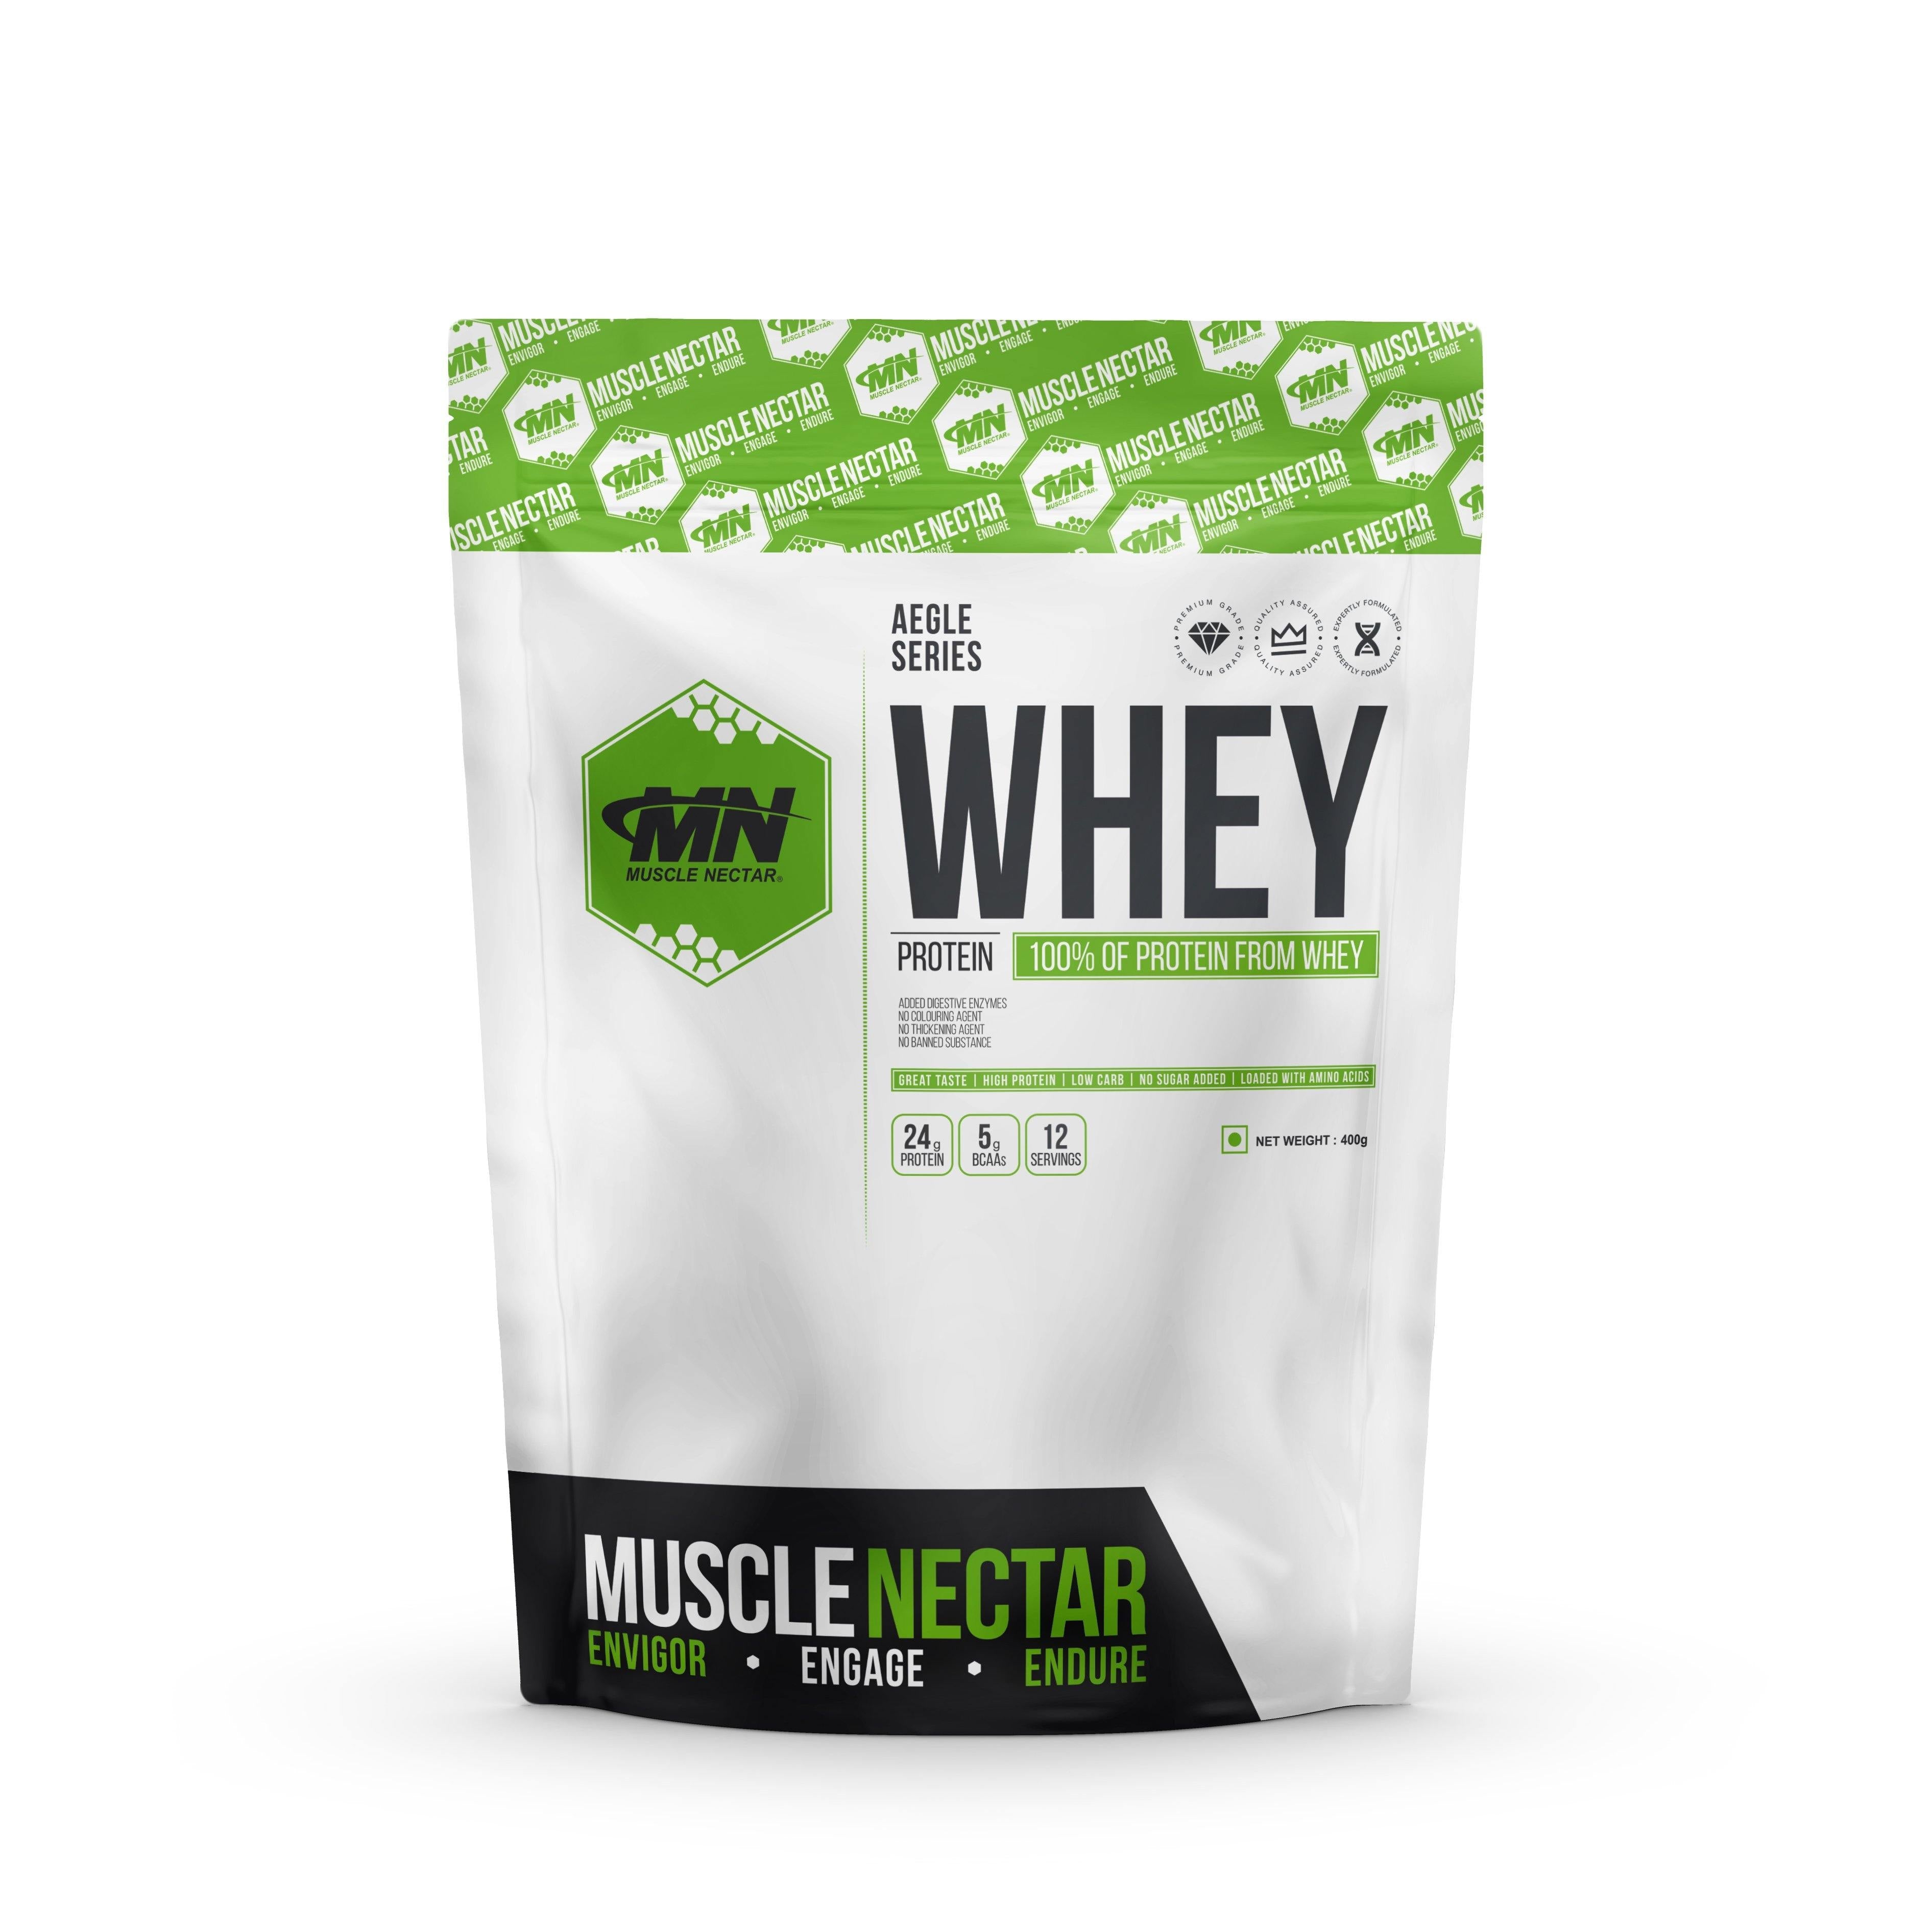 100% Whey Protein Powder (Blend of Concentrate & Isolate) with Digestive Enzymes